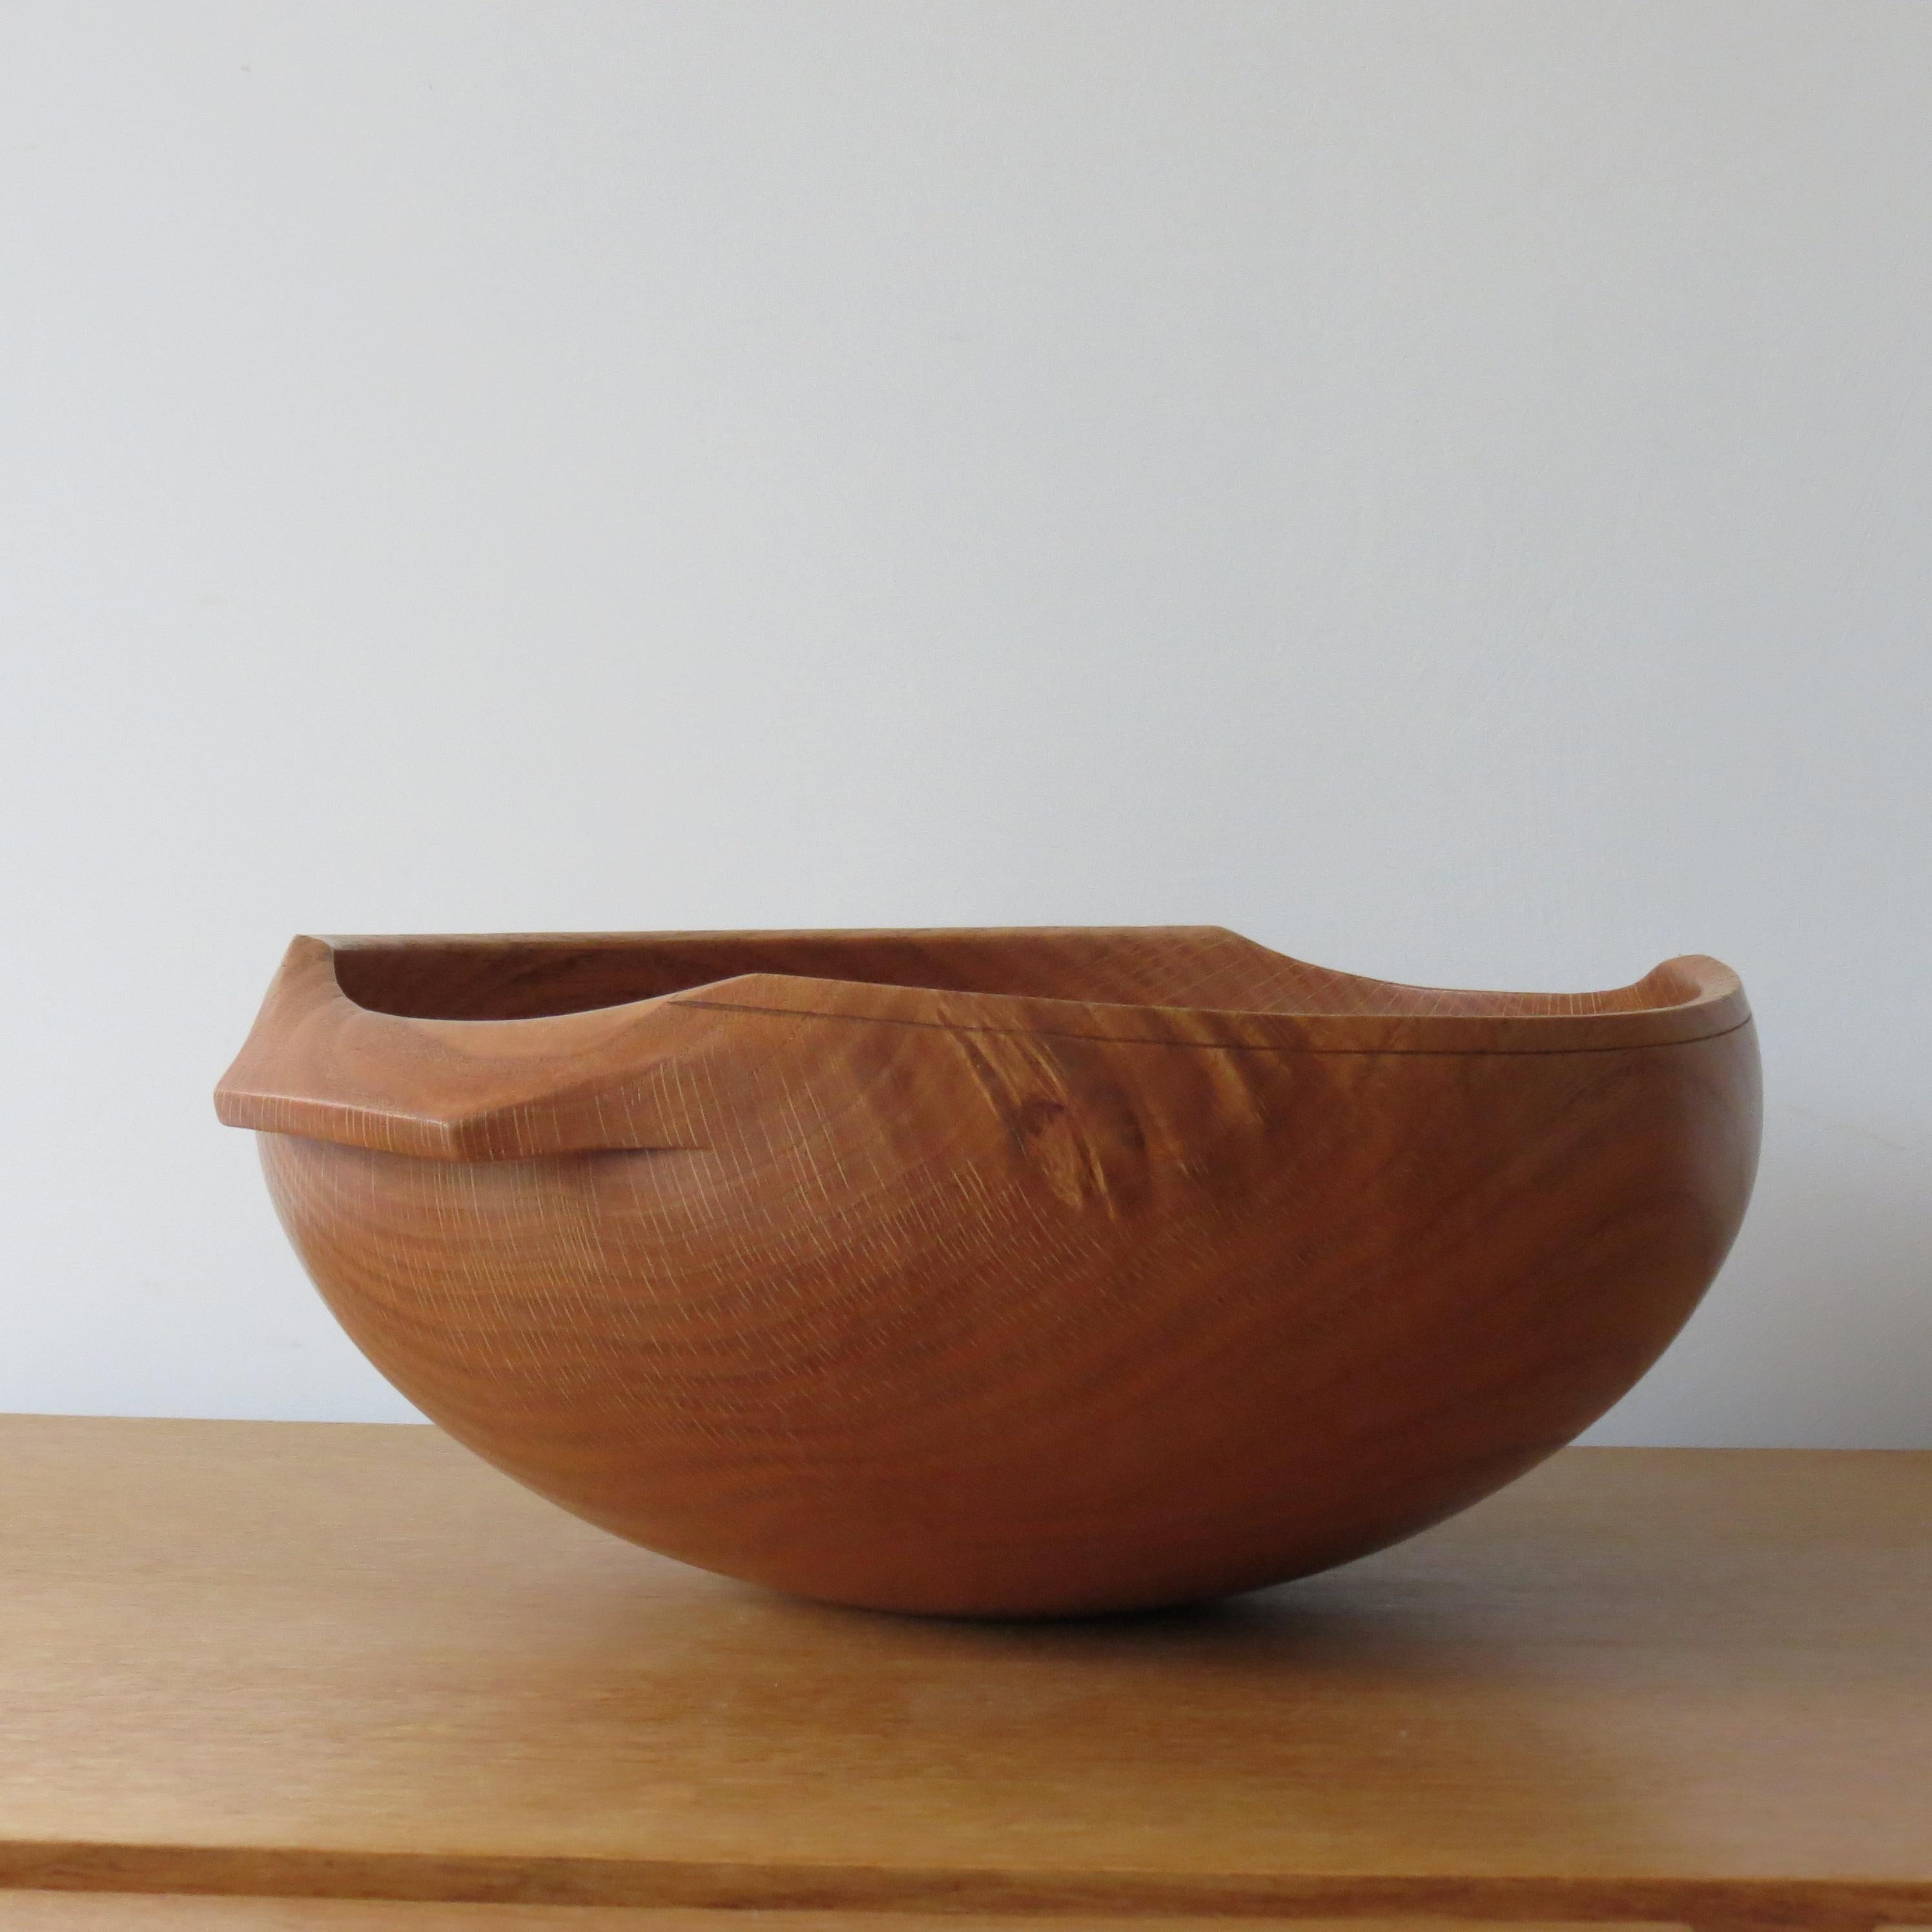 A large vintage wooden bowl, made from solid oak with sculptural handle details.

Very well hand turned with wonderful grain, good over all condition.

ST1318.